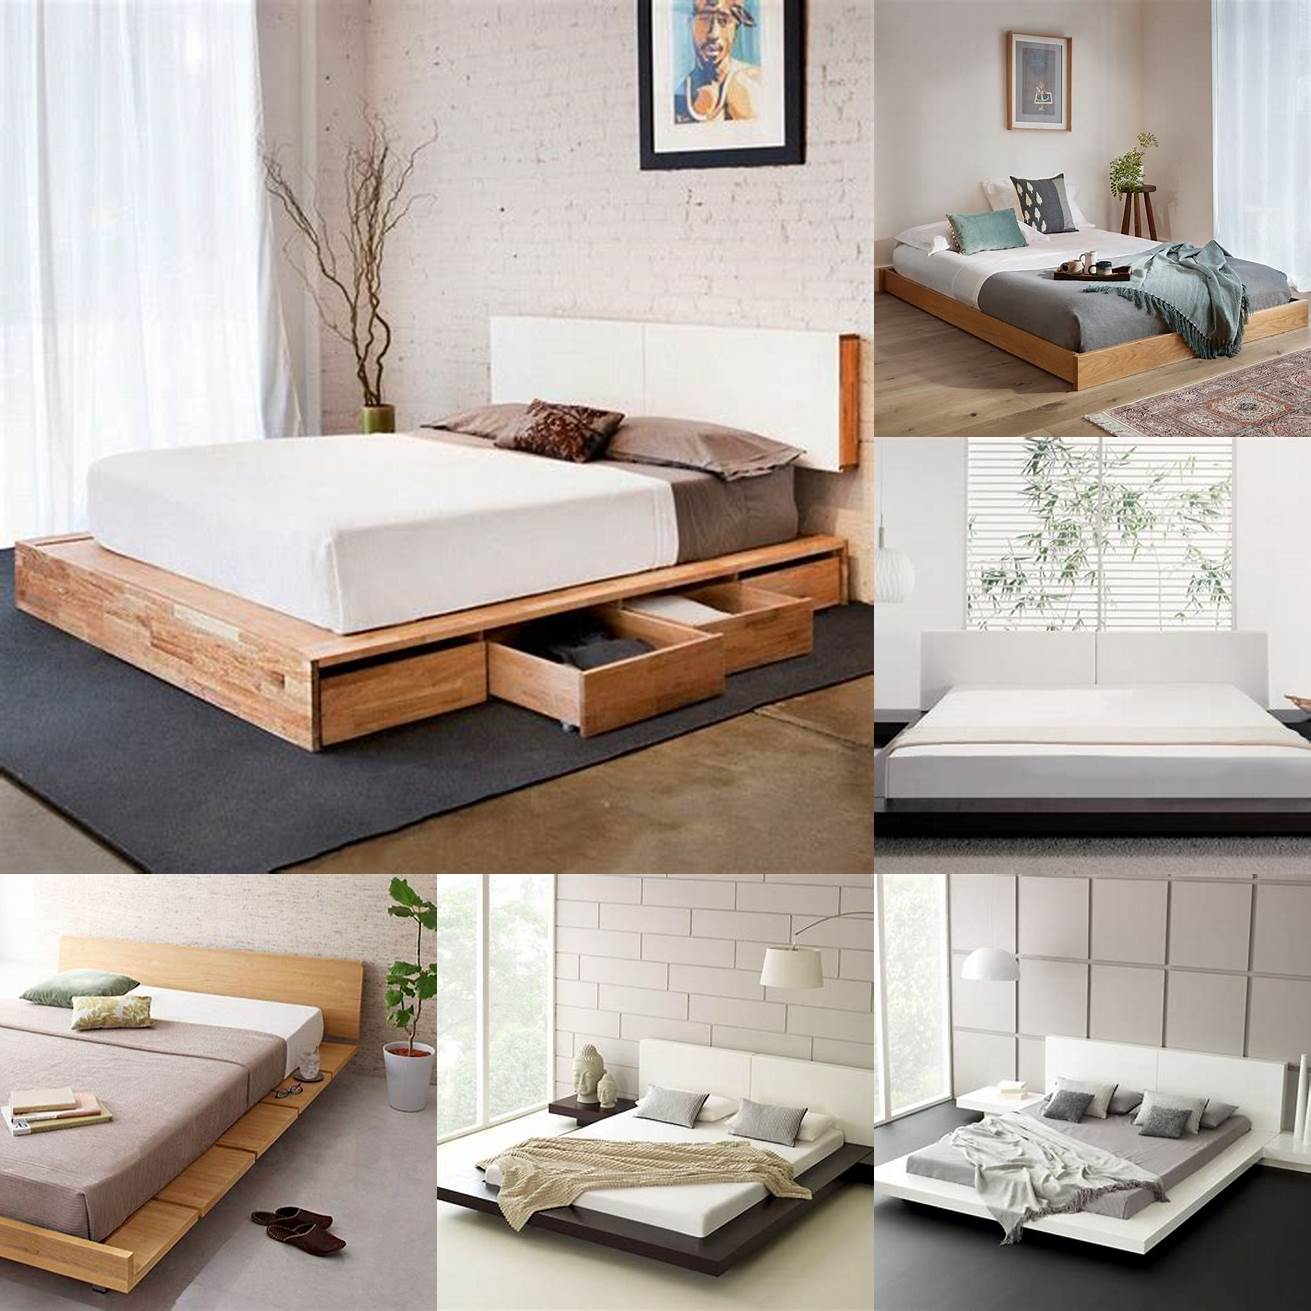 Platform bed - features a simple minimalist design with a low profile